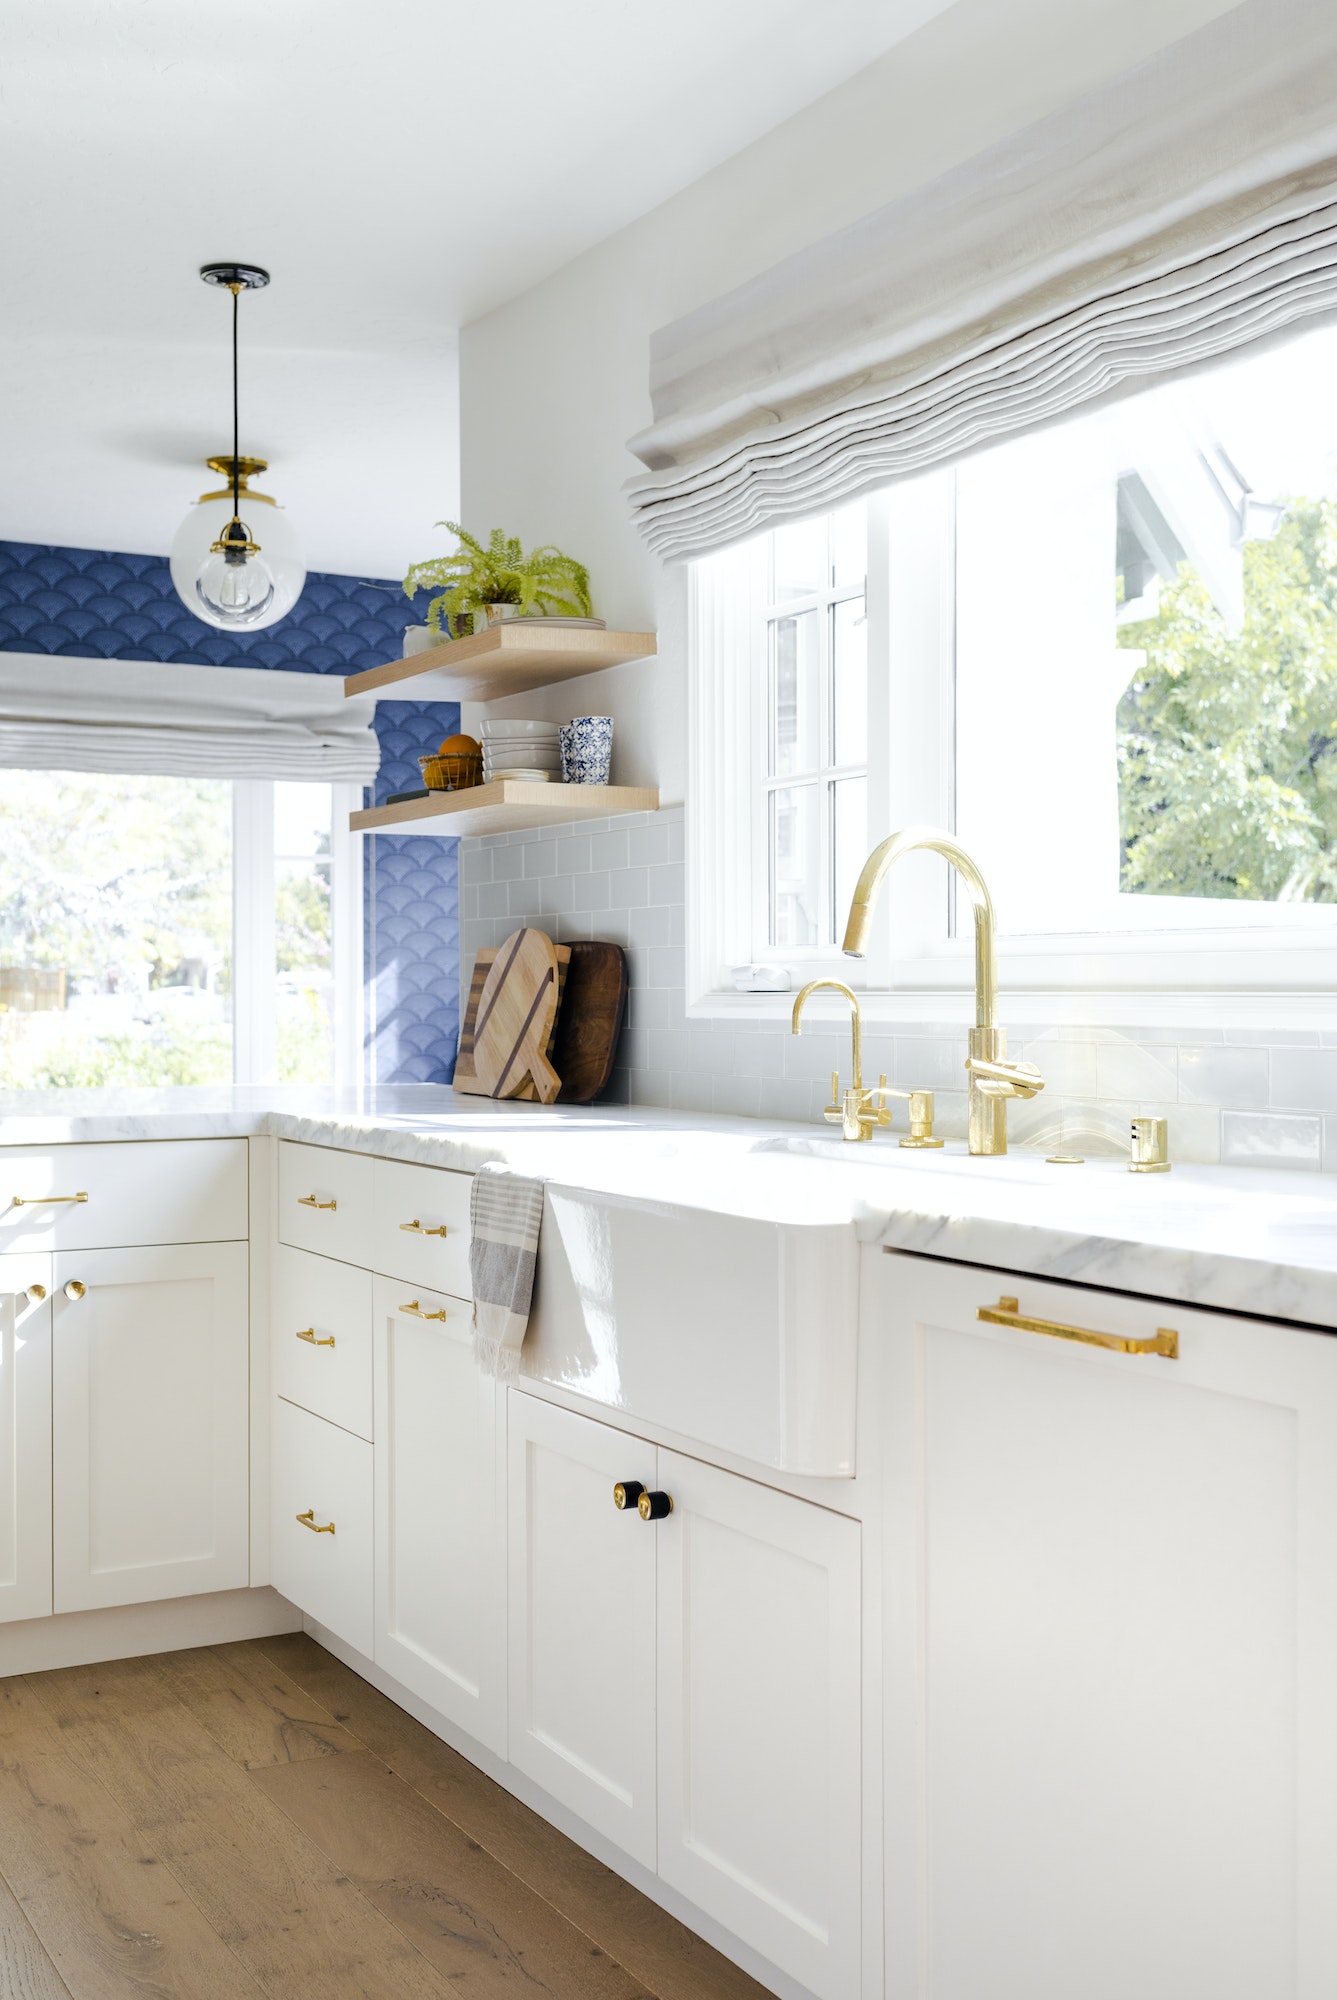 shaker style cabinet doors in a bright and white kitchen with a gold faucet